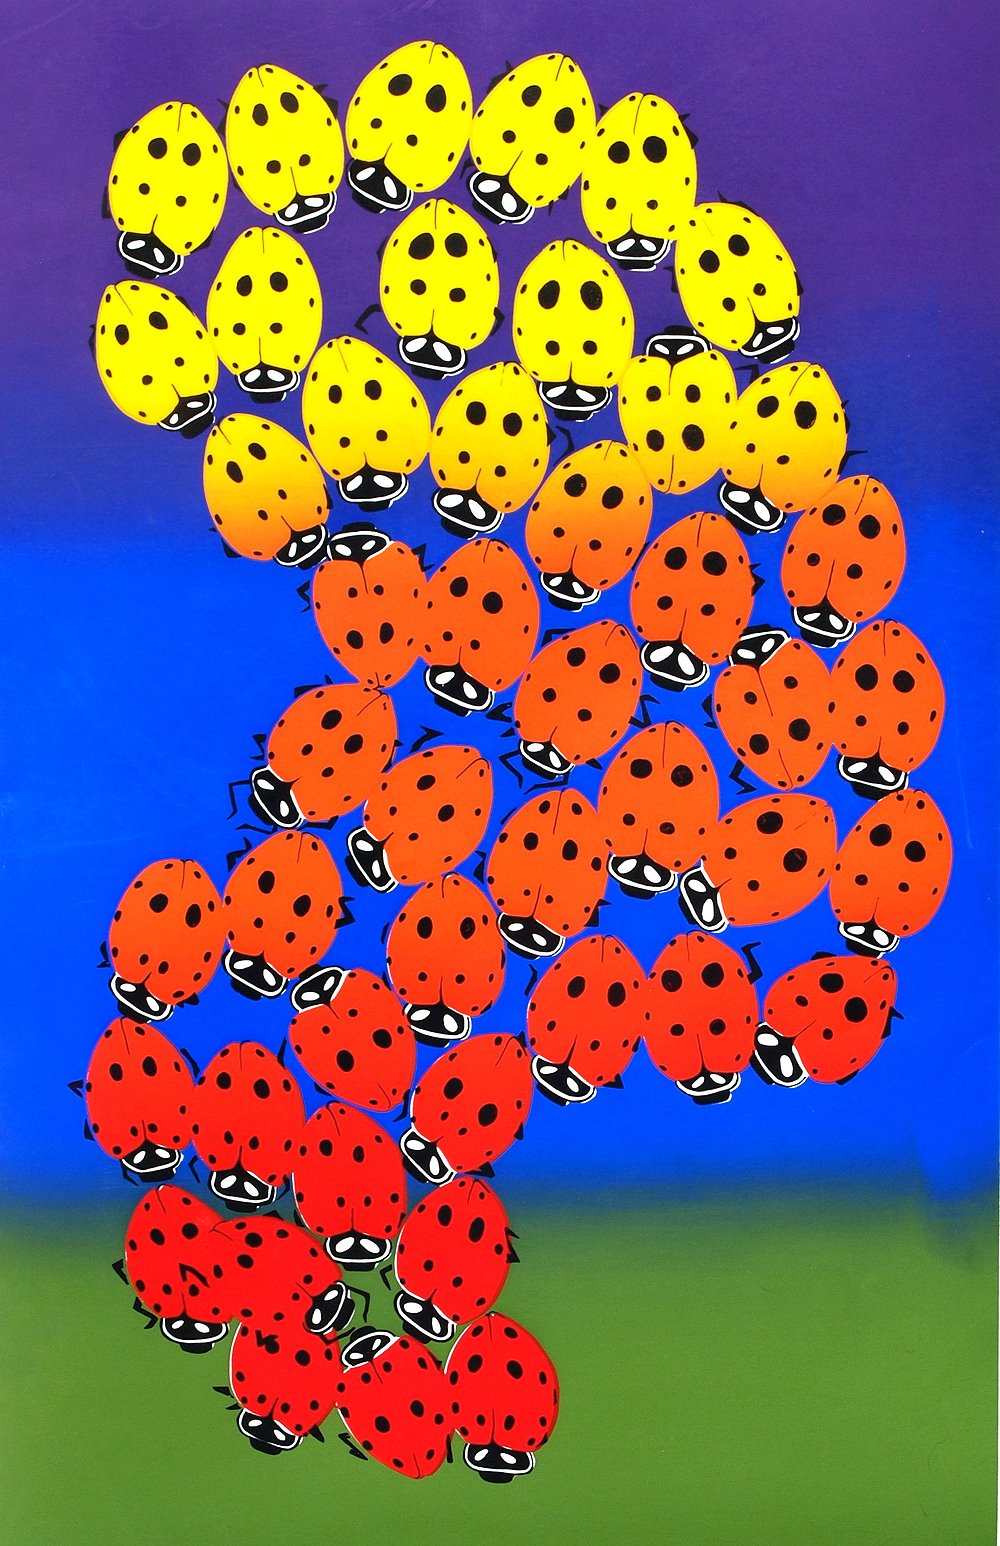 Ladybugs Serigraph A-P by Irene Watts | ArtworkNetwork.com